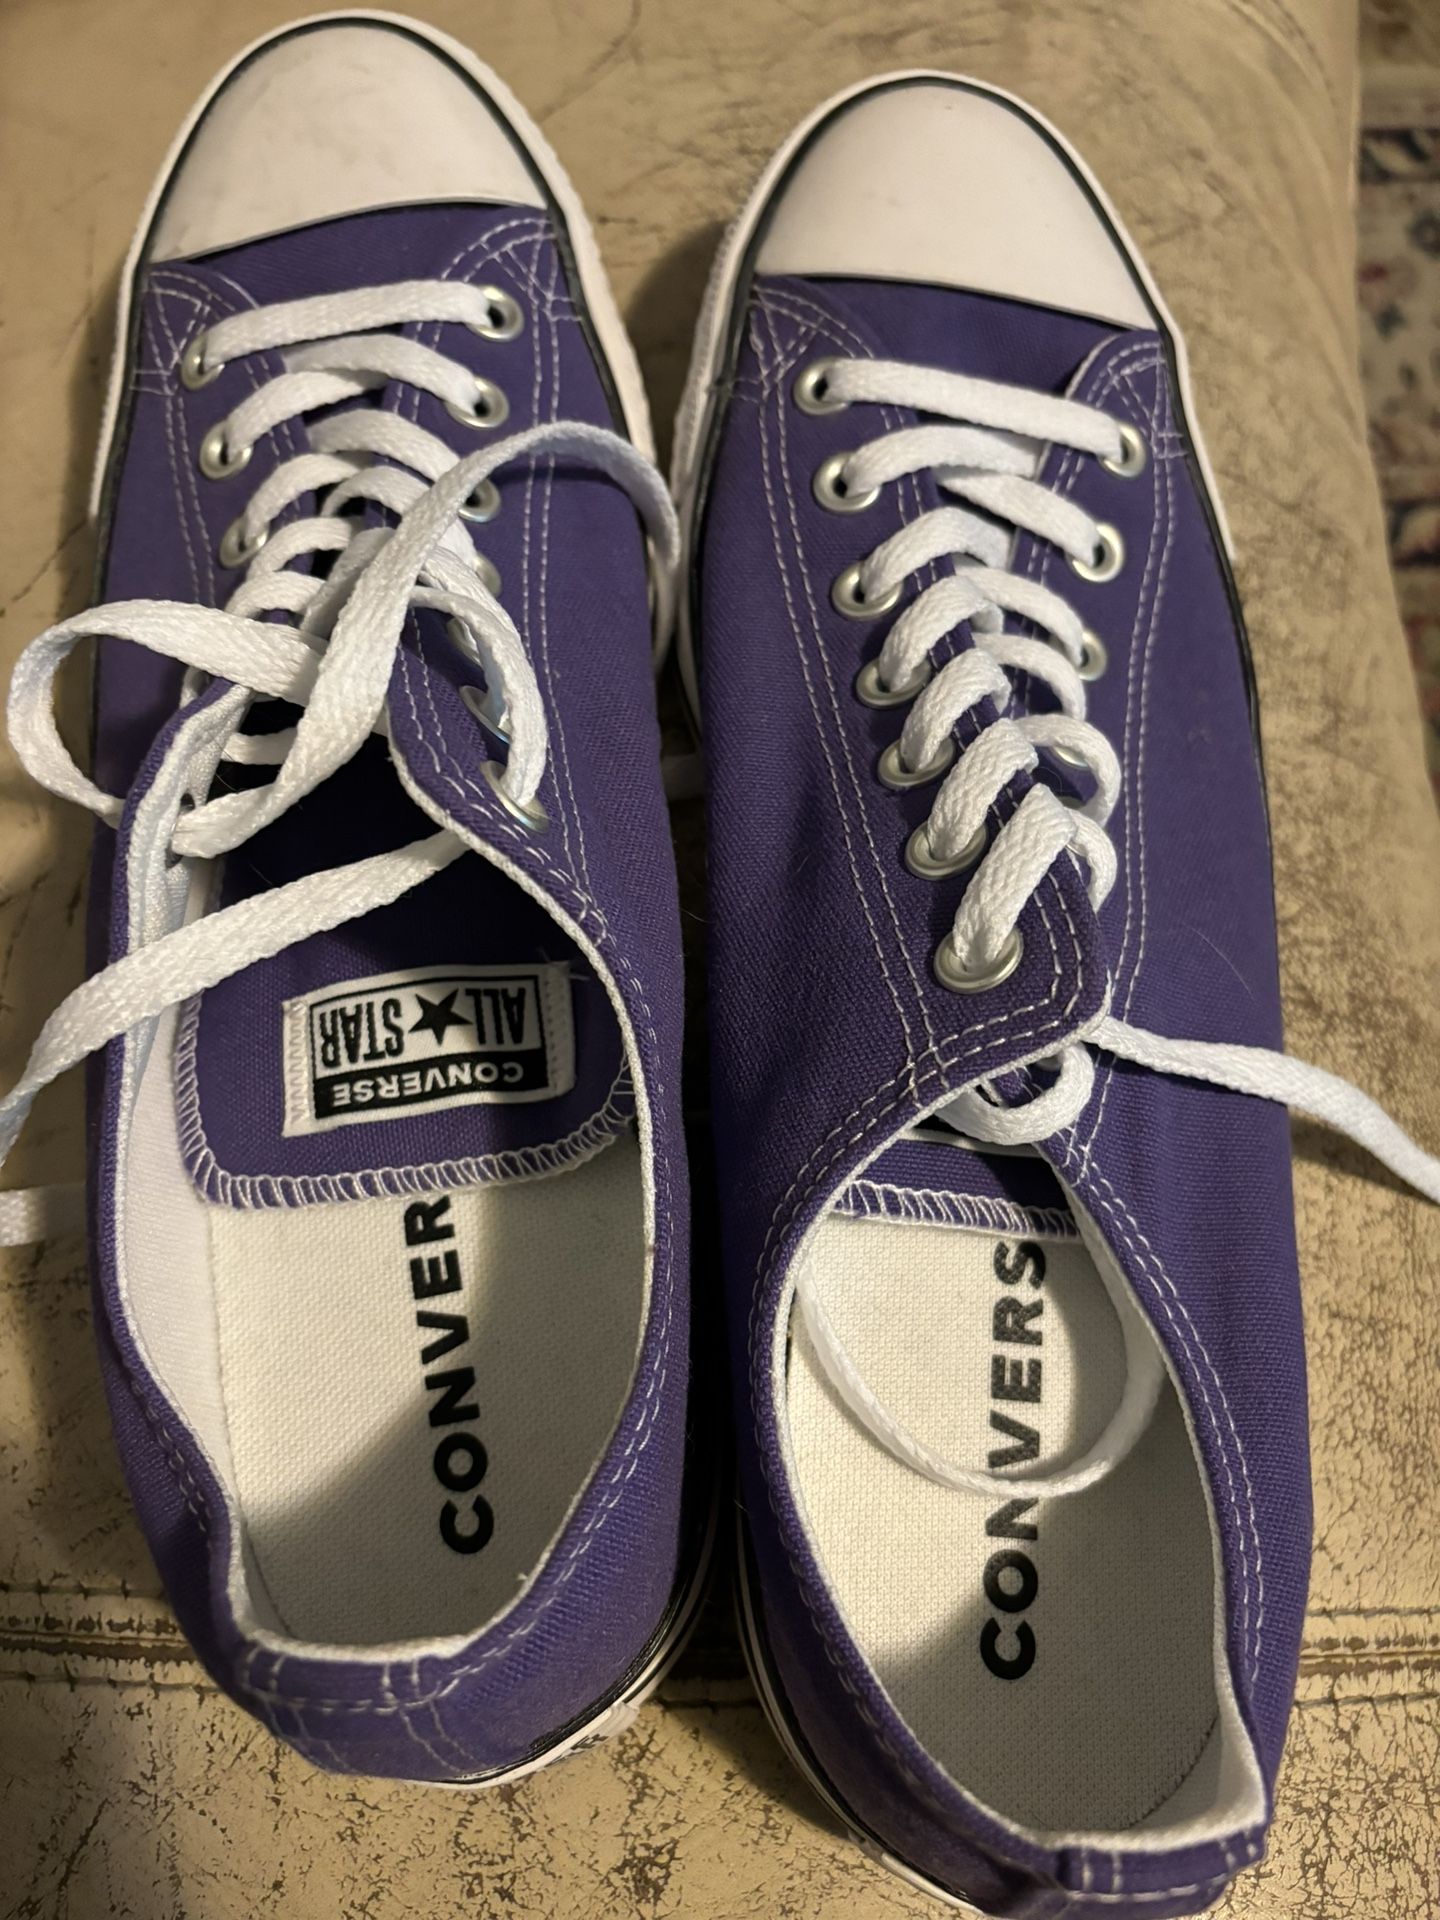 CONVERSE CHUCK TAYLOR ALL STAR PURPLE LOW TOP SHOES